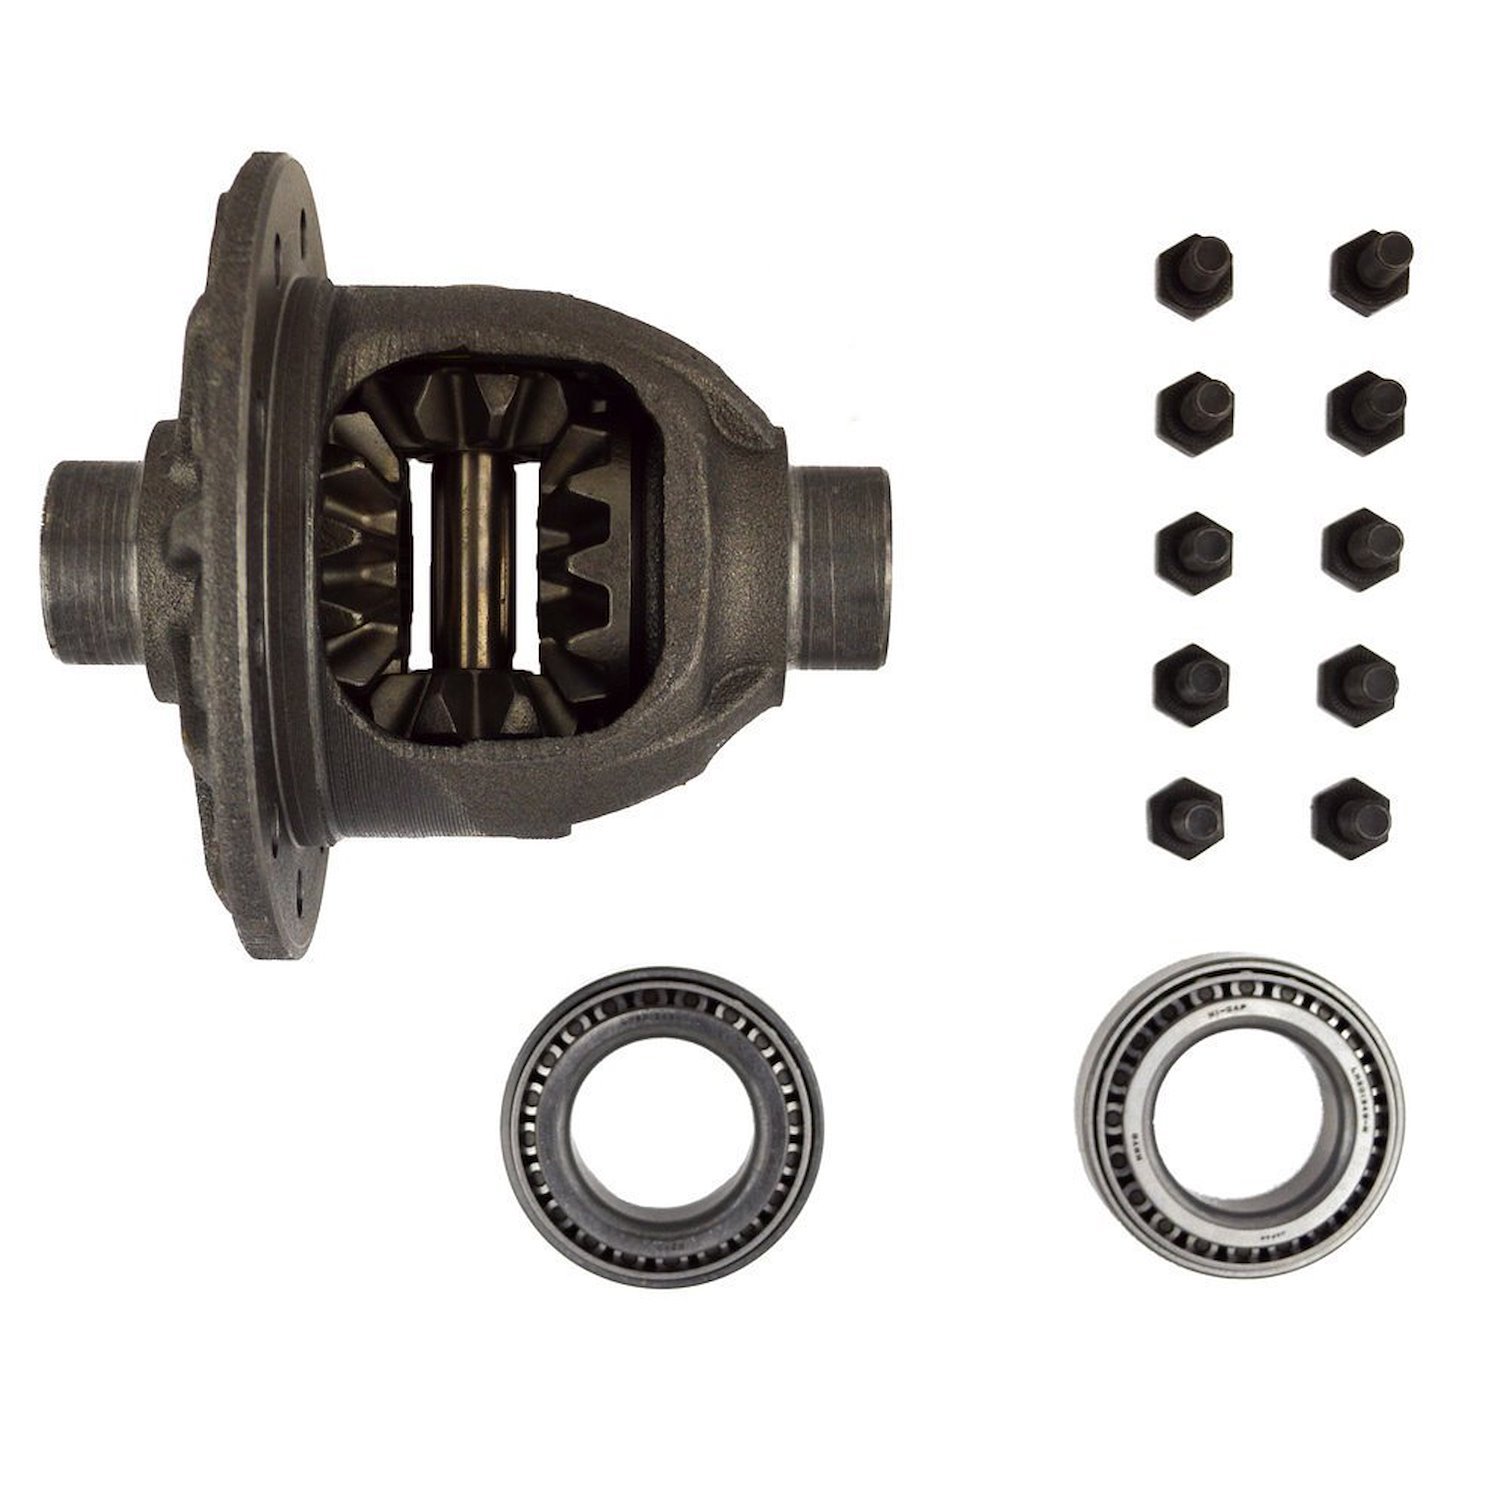 Differential Case Assembly Kit for Dana 30 Front